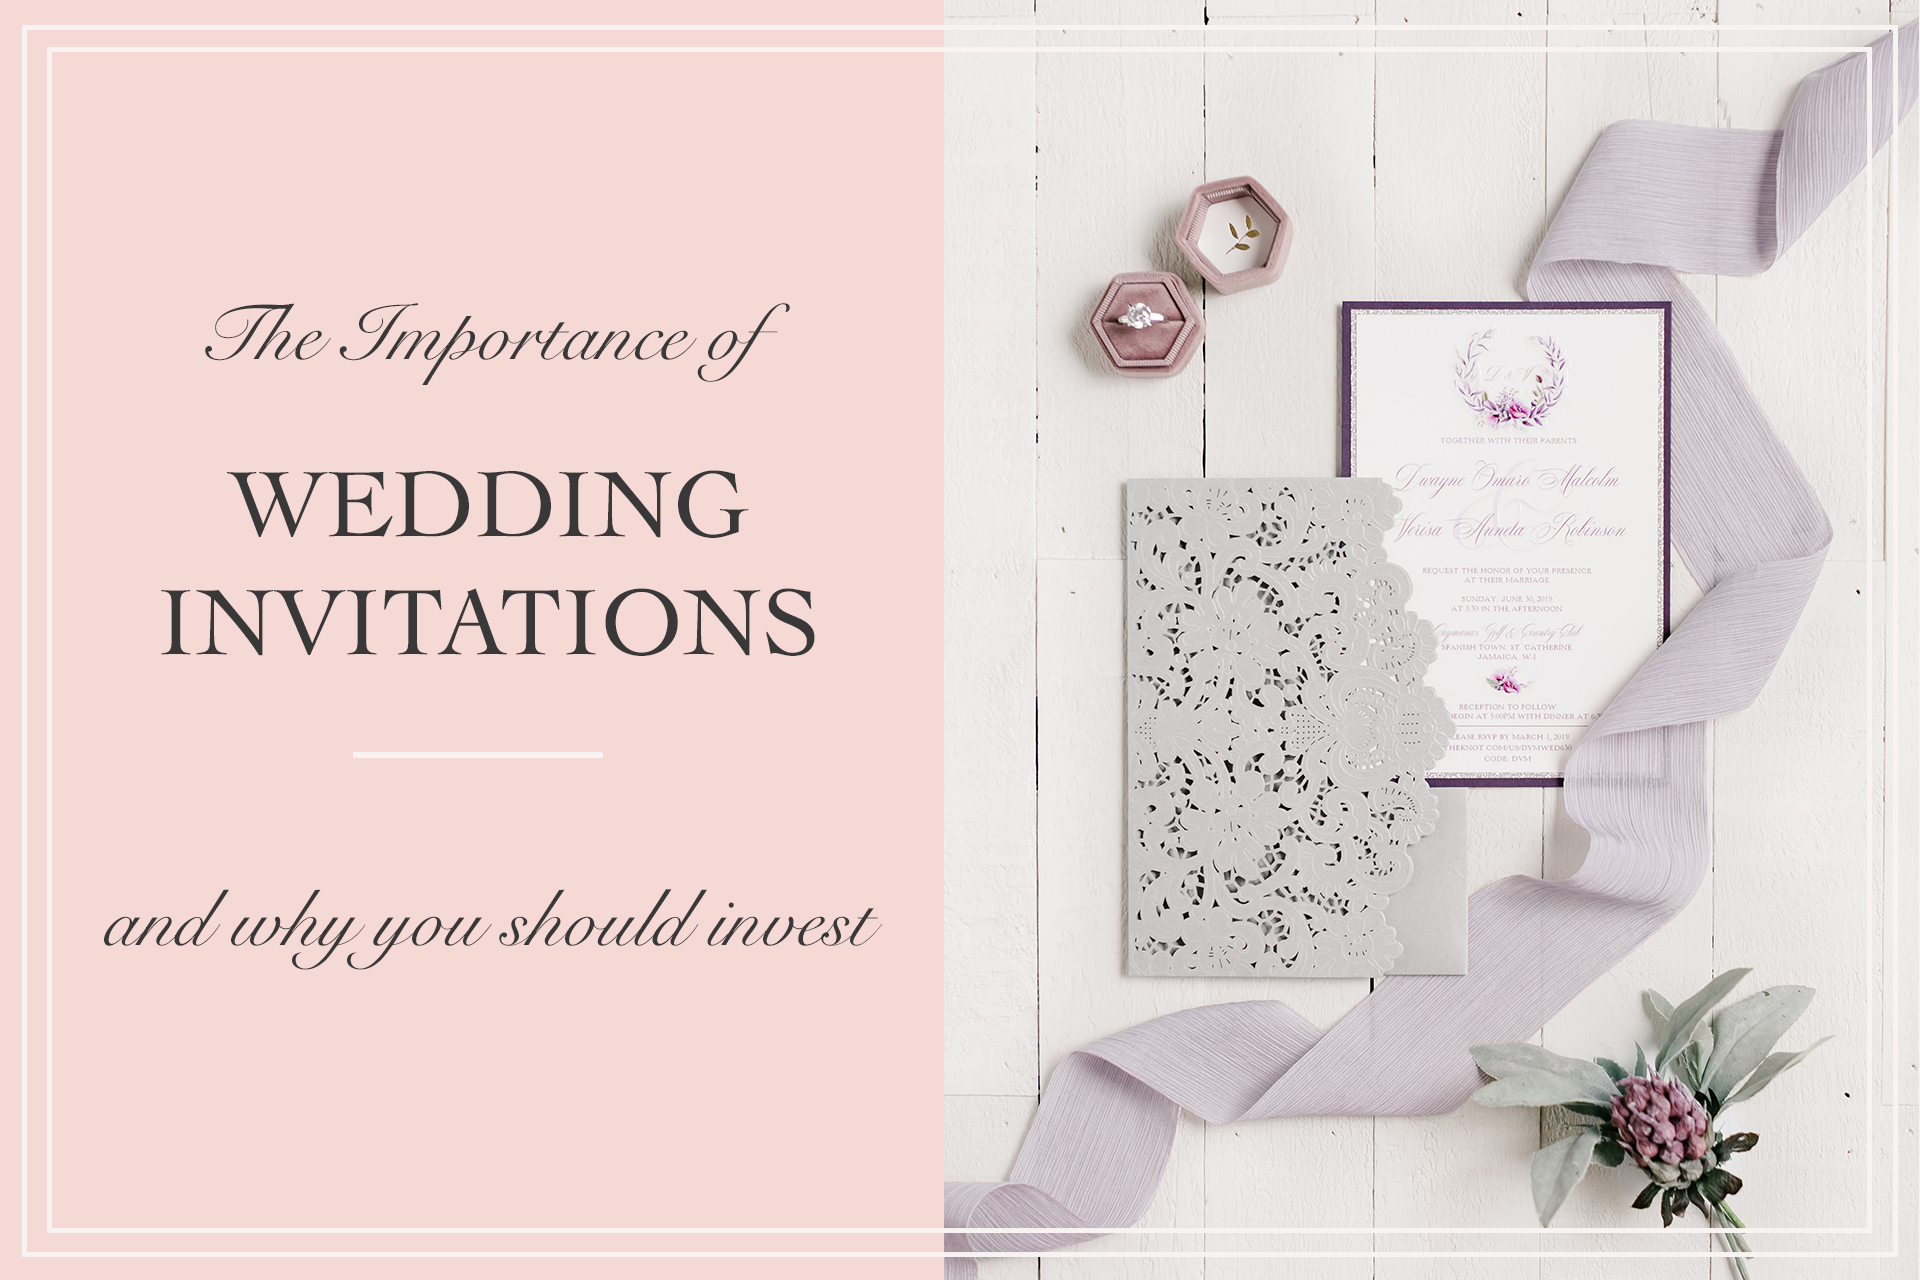 Why Wedding Invitations are Important - broadriverblog.com